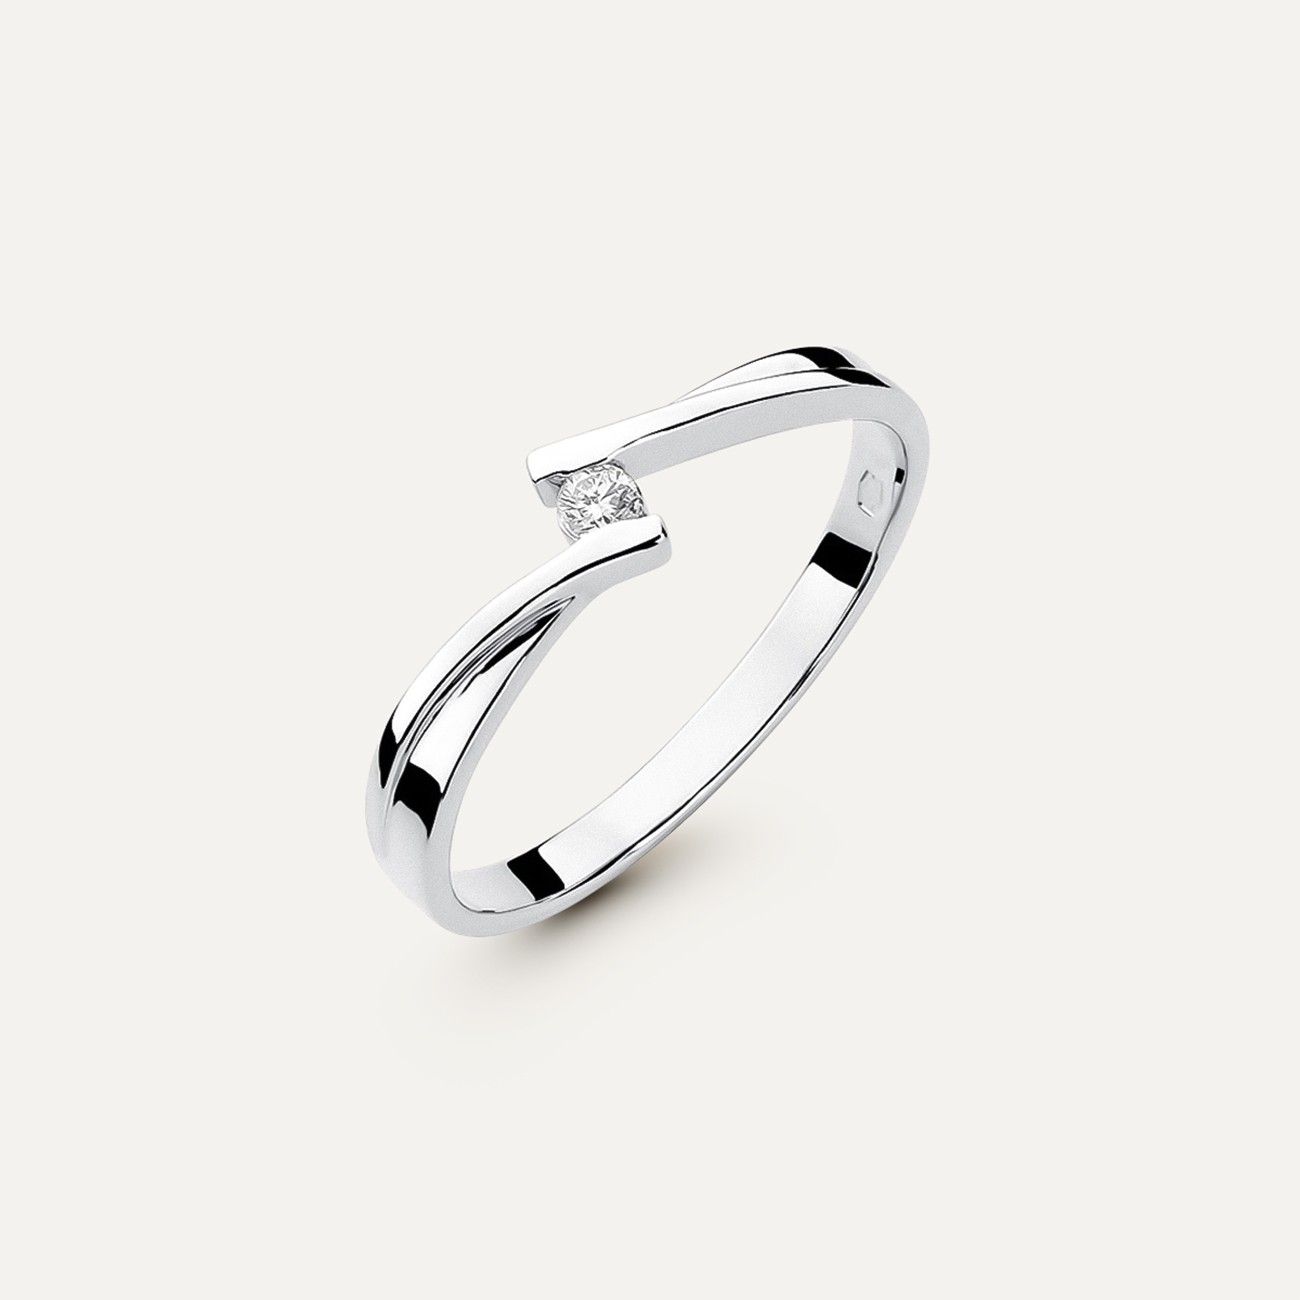 Ring waves drops, sterling silver 925